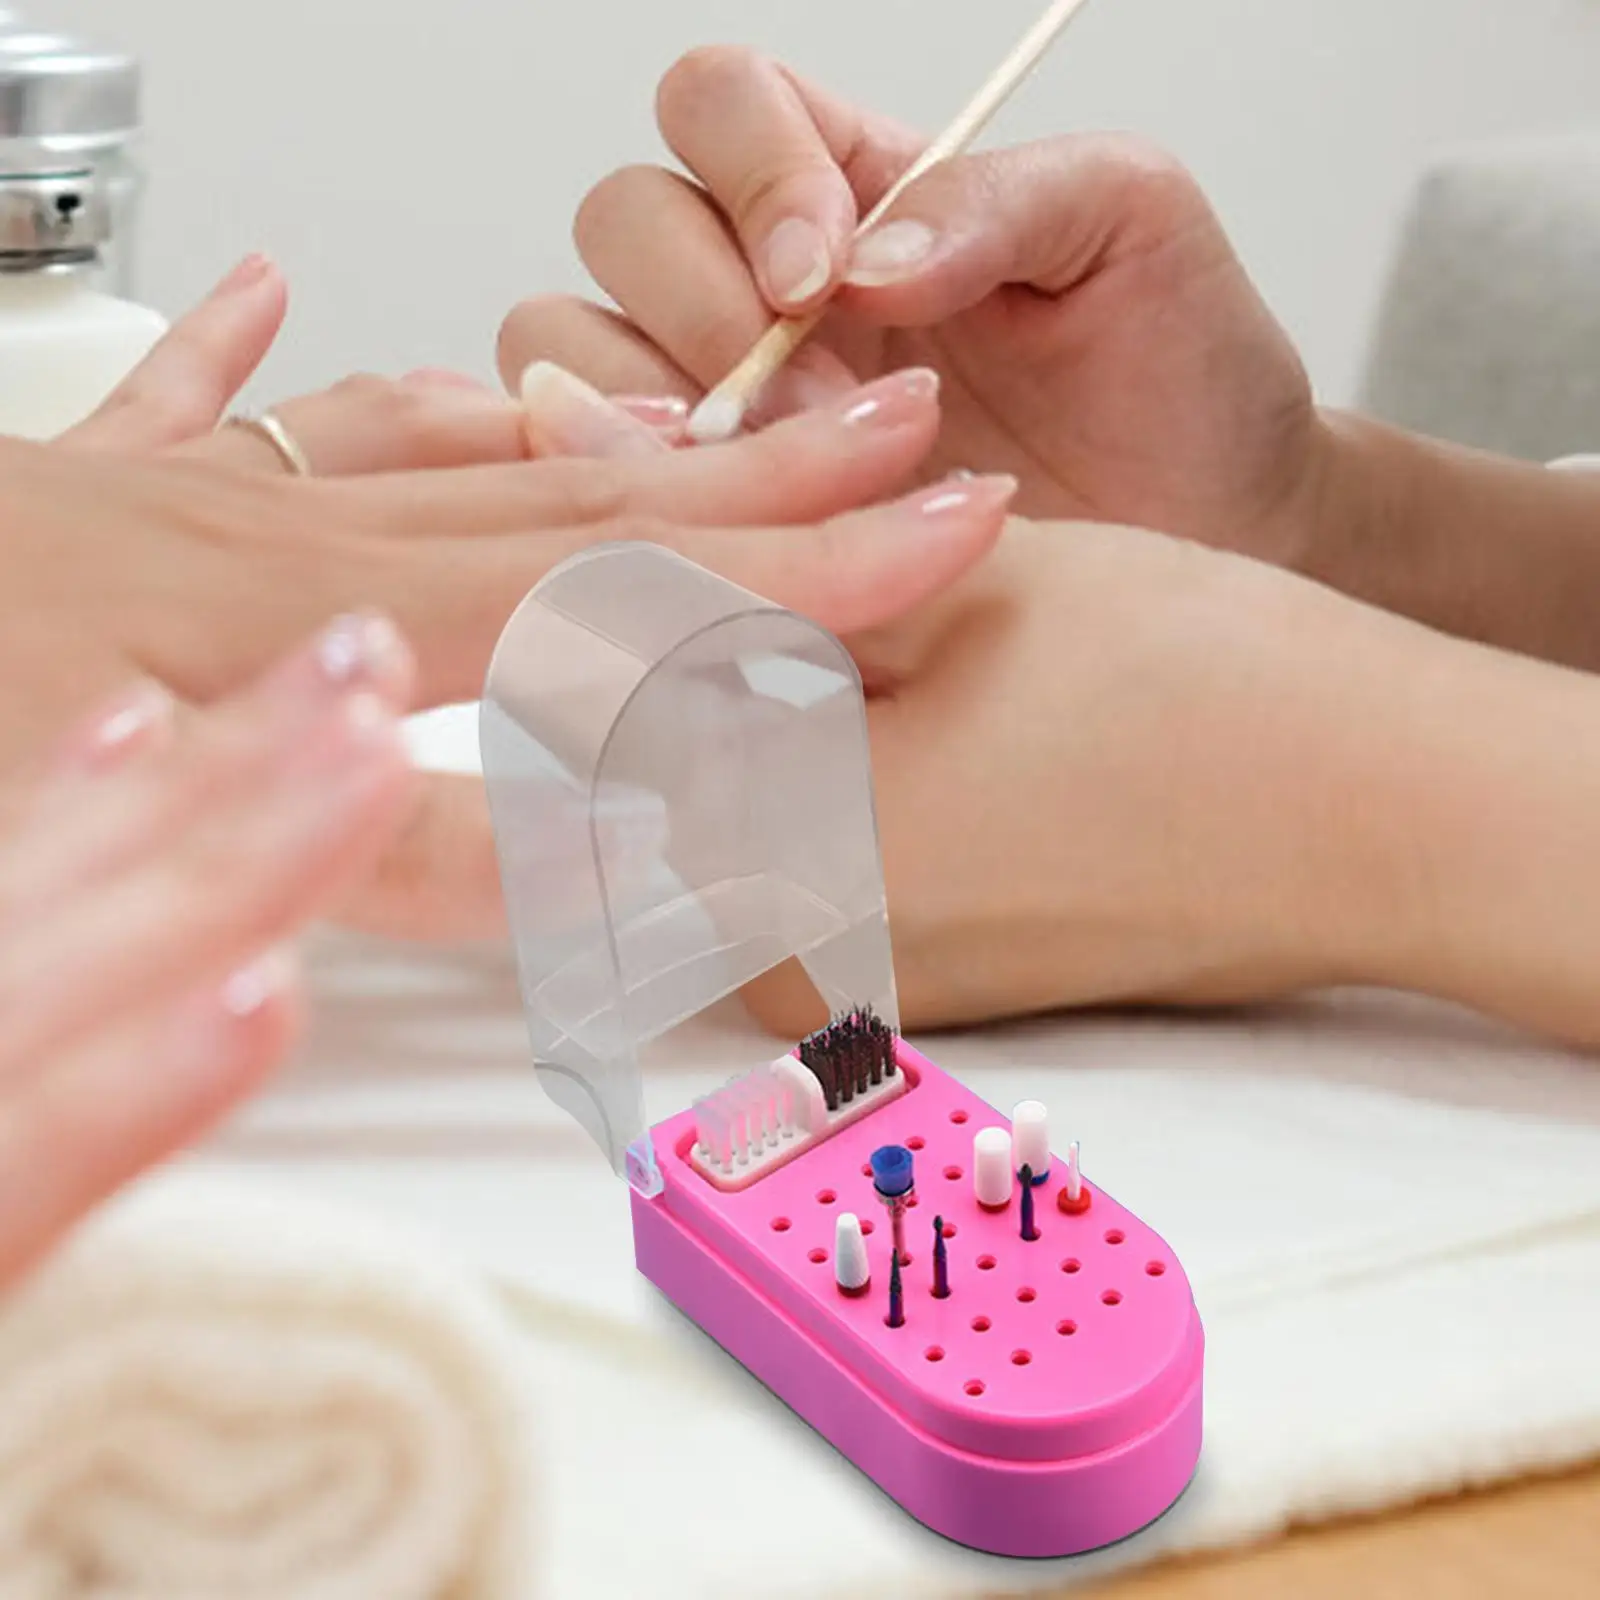 Pink Nail Drill Bit Holder Home DIY Lightweight with Cleaning Brass Wire and Soft Brushes Manicure Tool 30 Slots Container Case